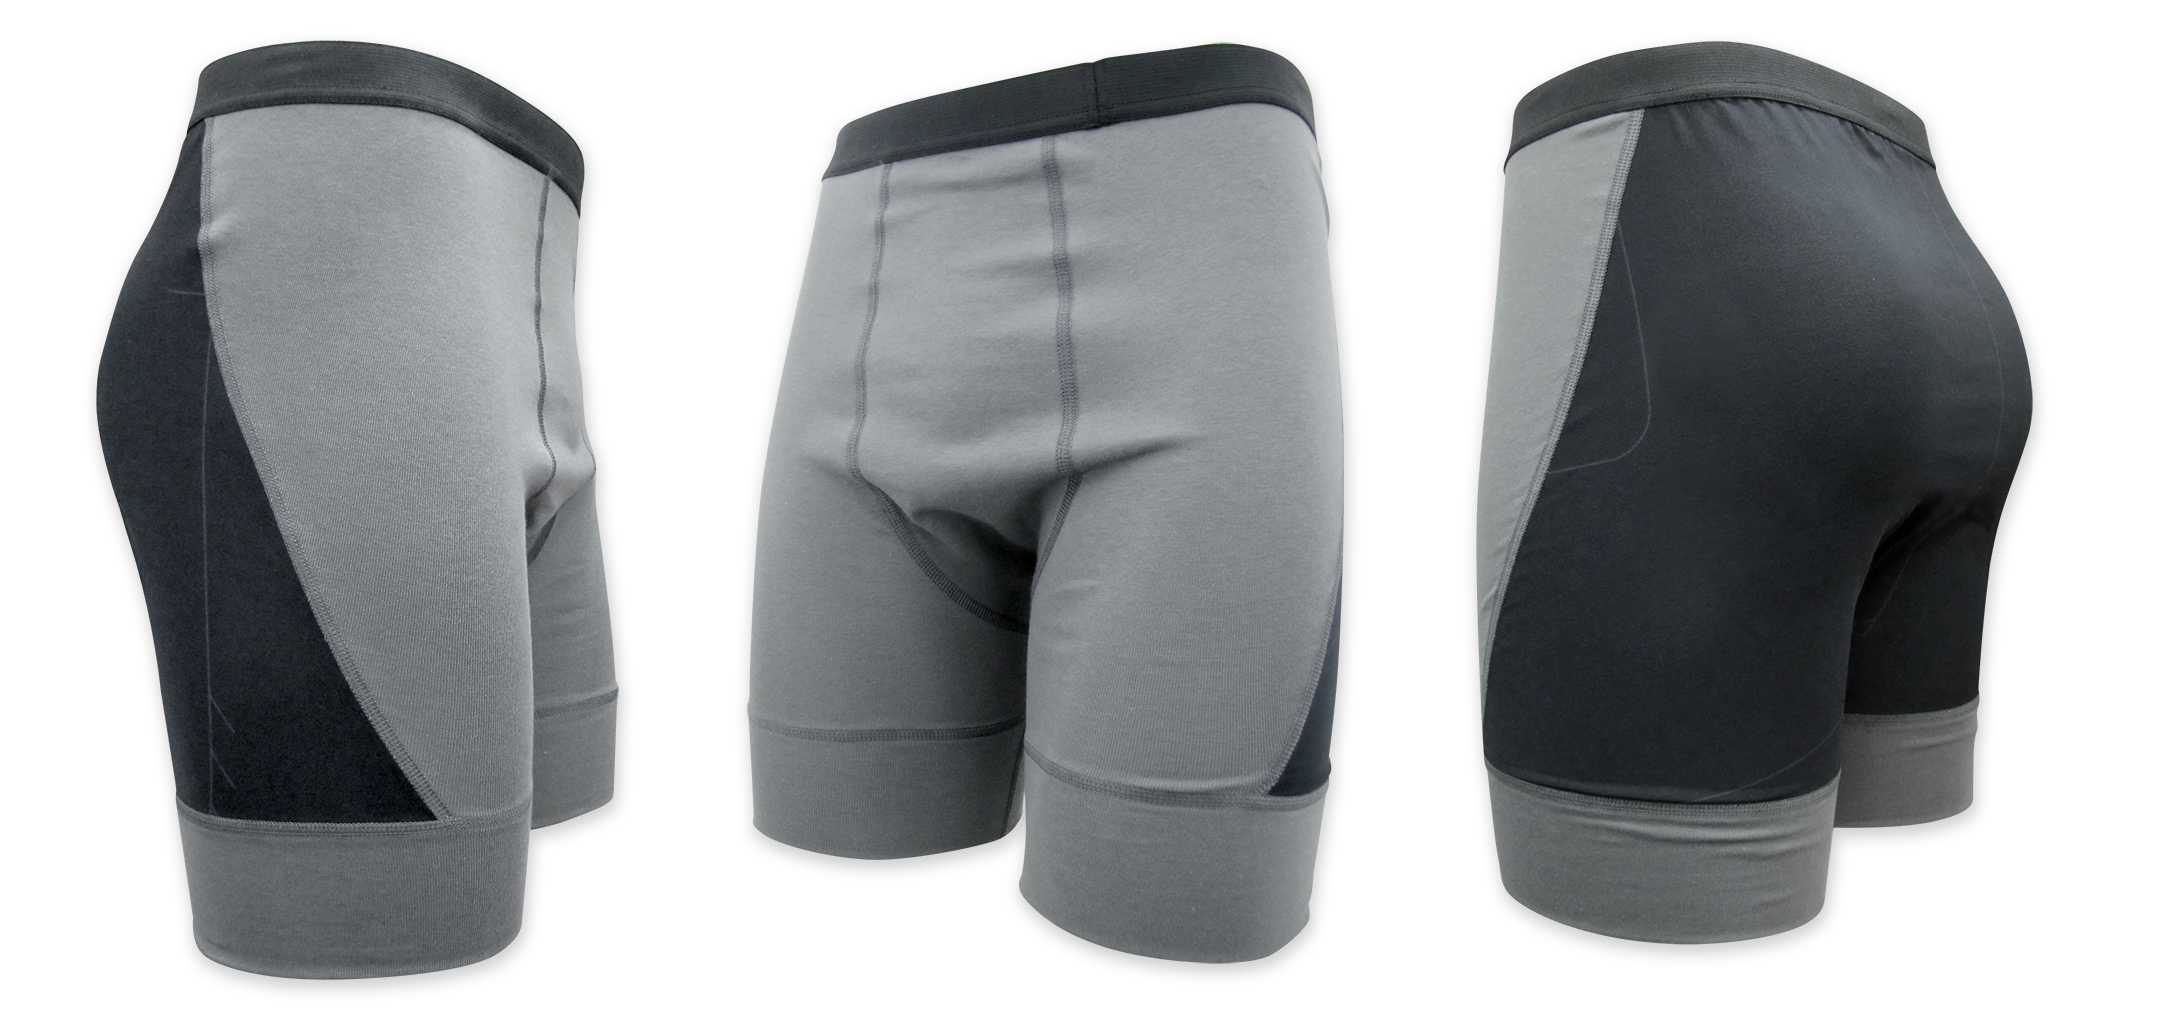 GlideWear SkinProtection Underwear, featuring a dual layer low friction zone